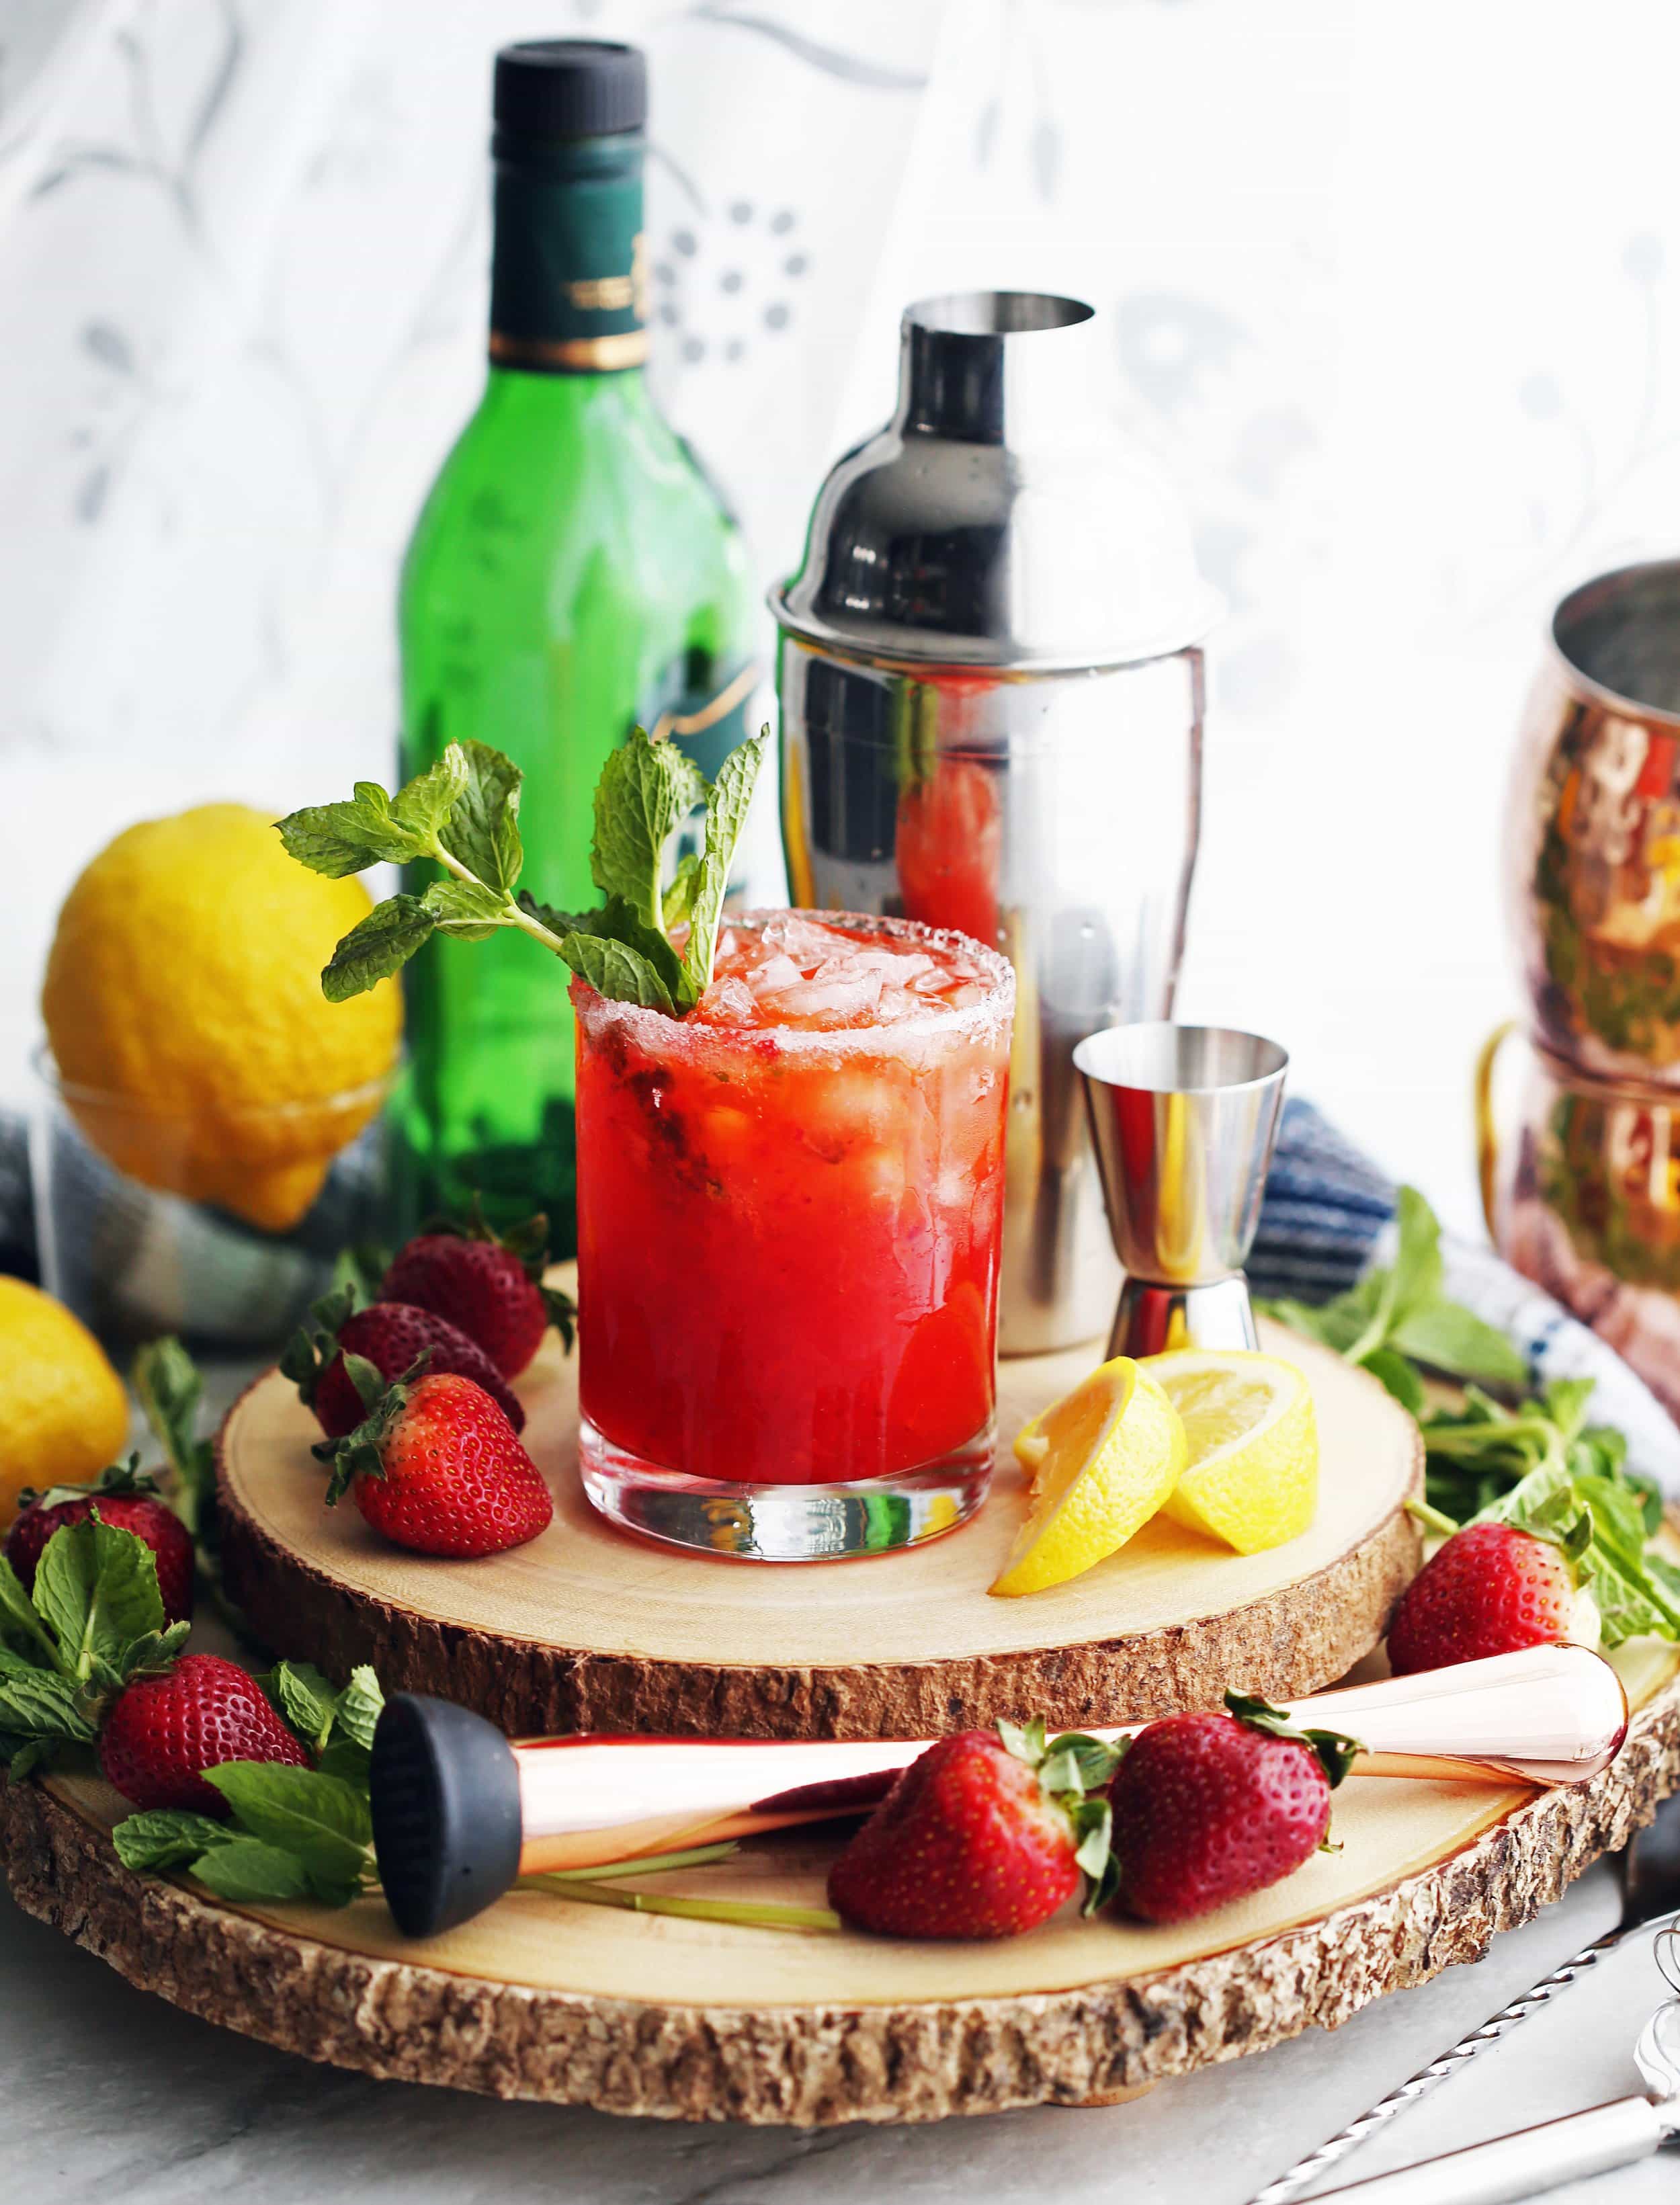 A glass of Mint Strawberry Whisky Smash drink that's sitting on two wooden platters and surrounded by a cocktail set, lemons, and strawberries.